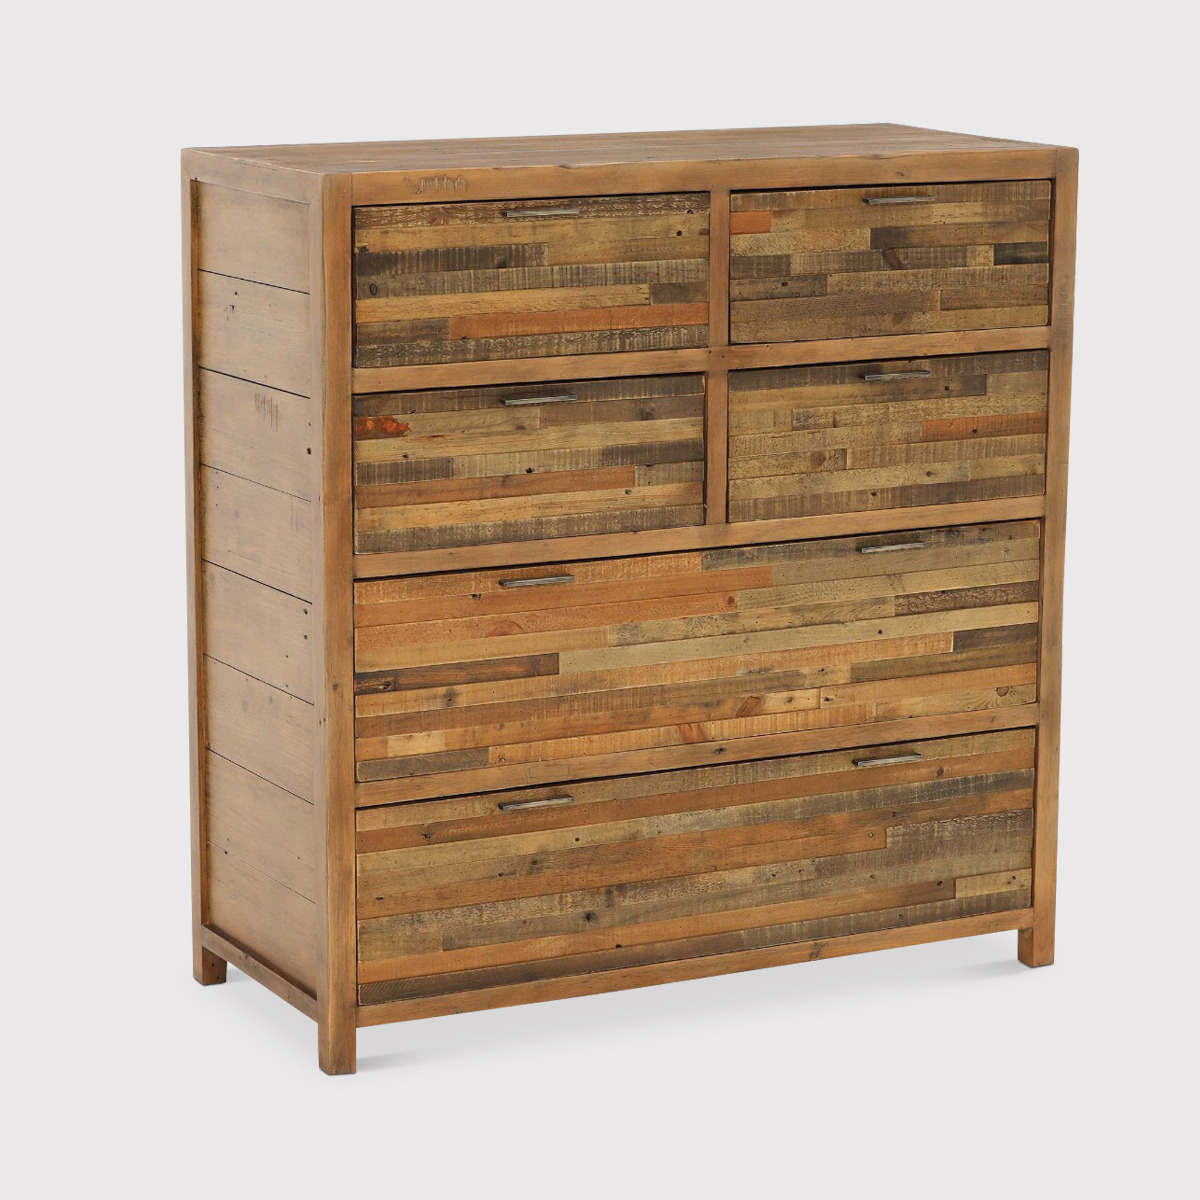 Charlie 6 Drawer Chest Cabinet, Wood - Barker & Stonehouse - image 1